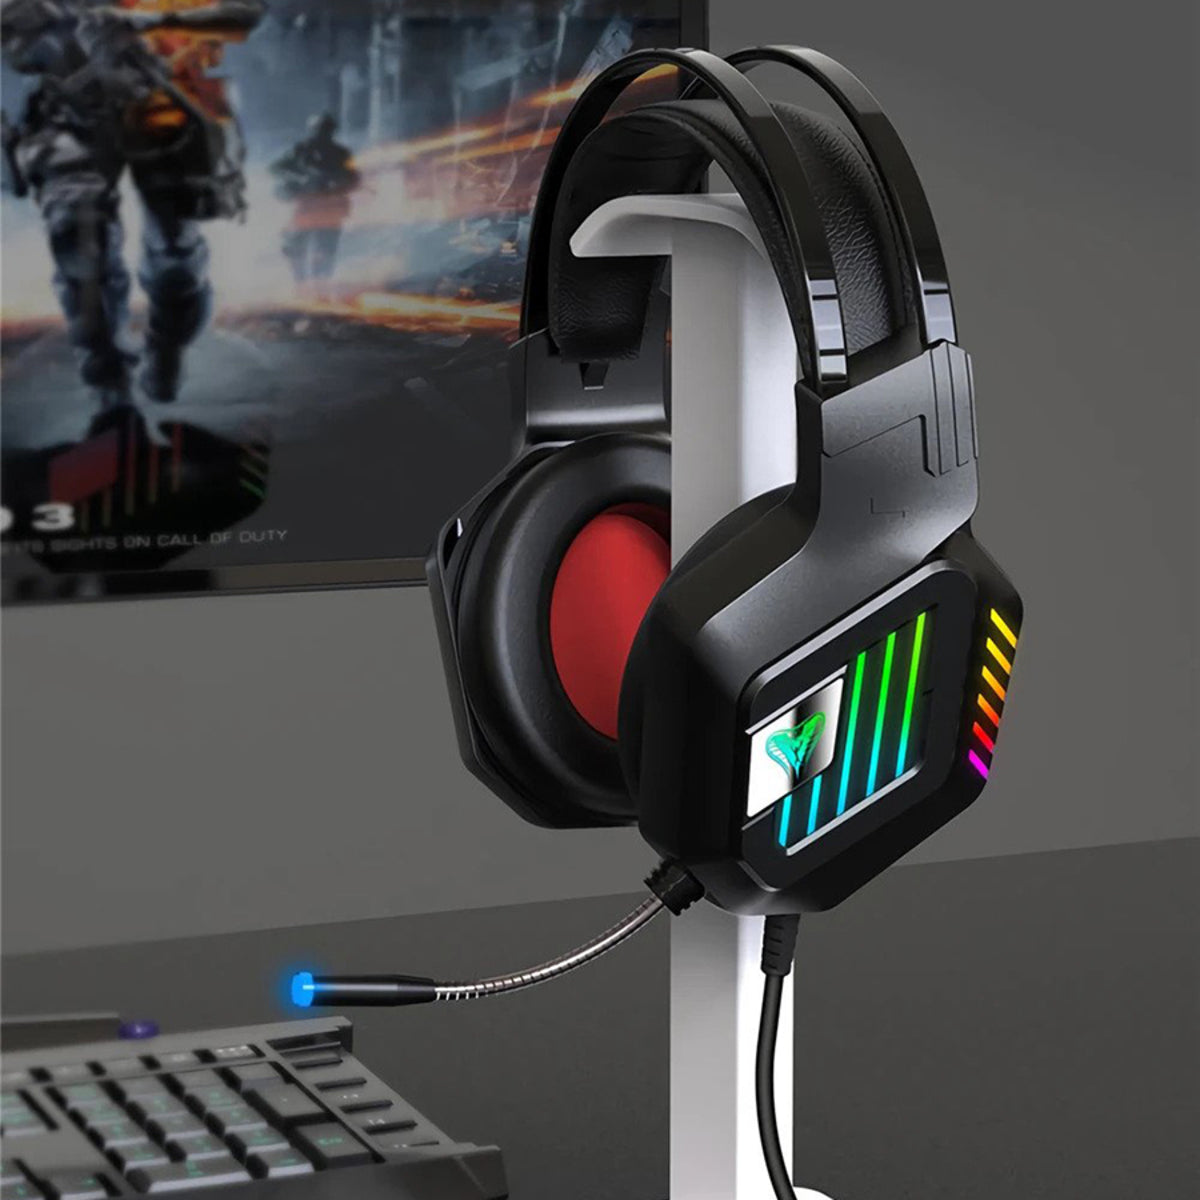 Headset Gaming PS4 RGB Light Xbox One Headset With Noise Canceling Mic PC Headset With Stereo Surround Sound